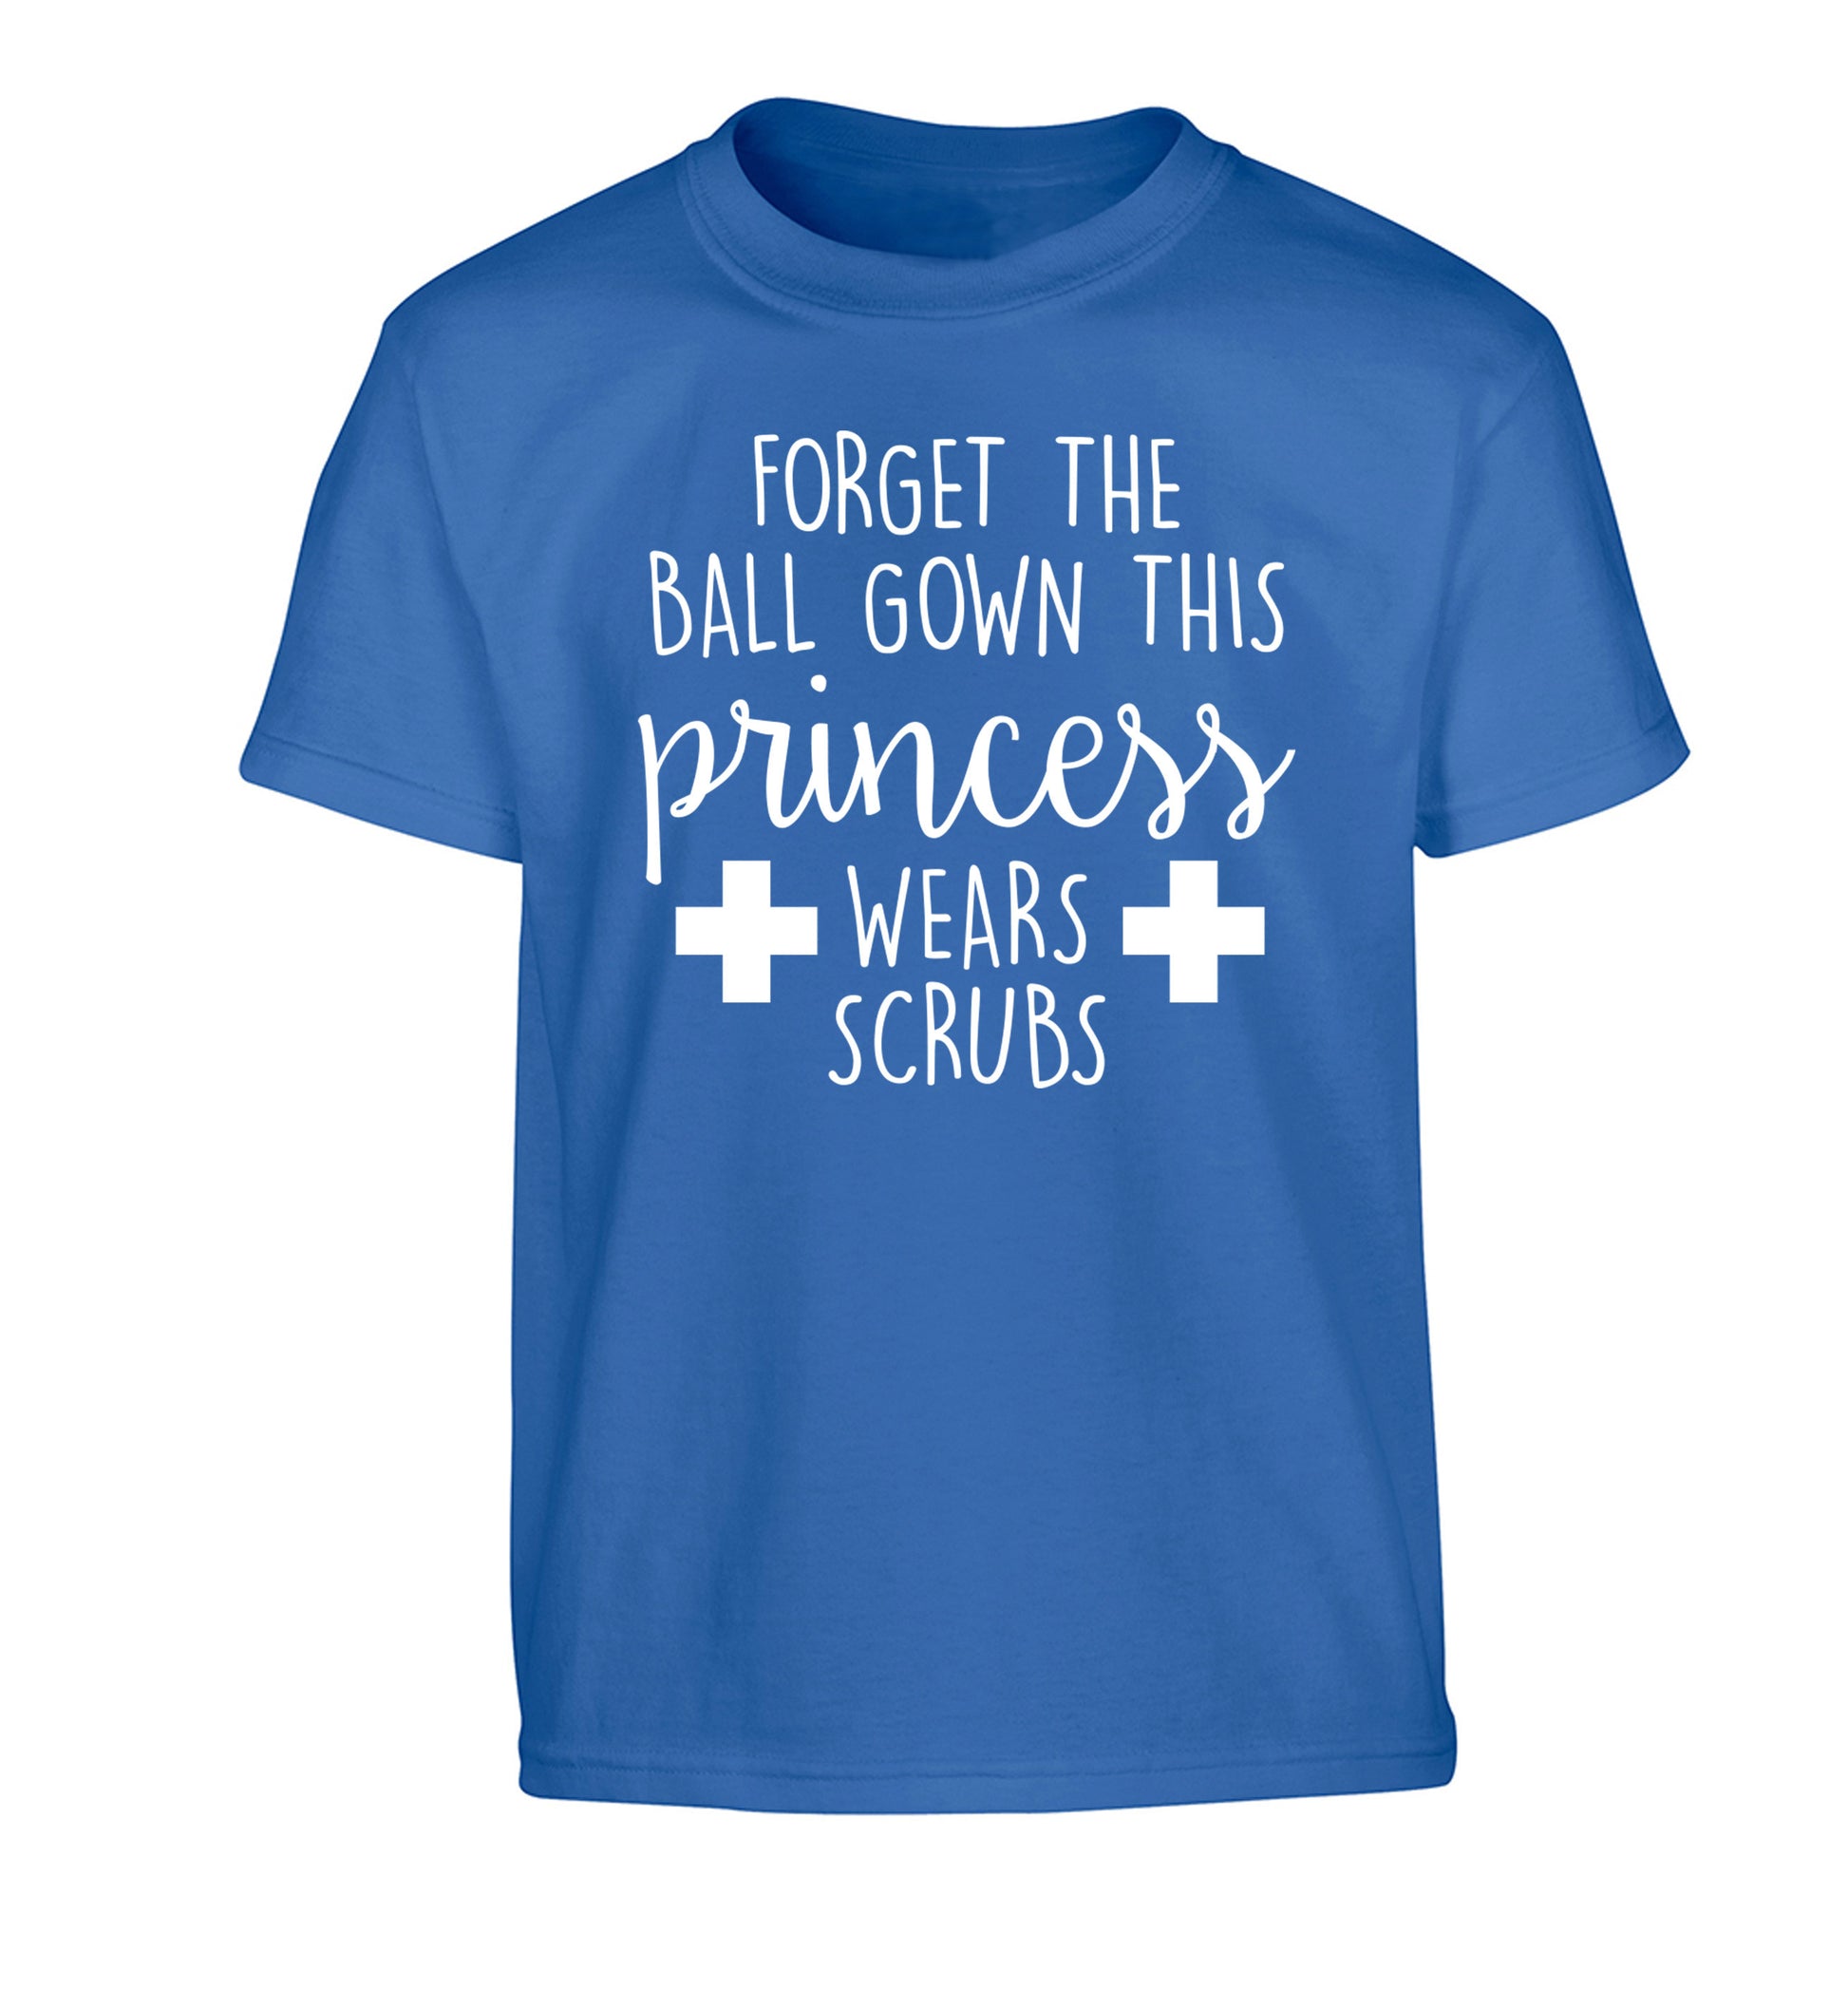 Forget the ball gown this princess wears scrubs Children's blue Tshirt 12-14 Years